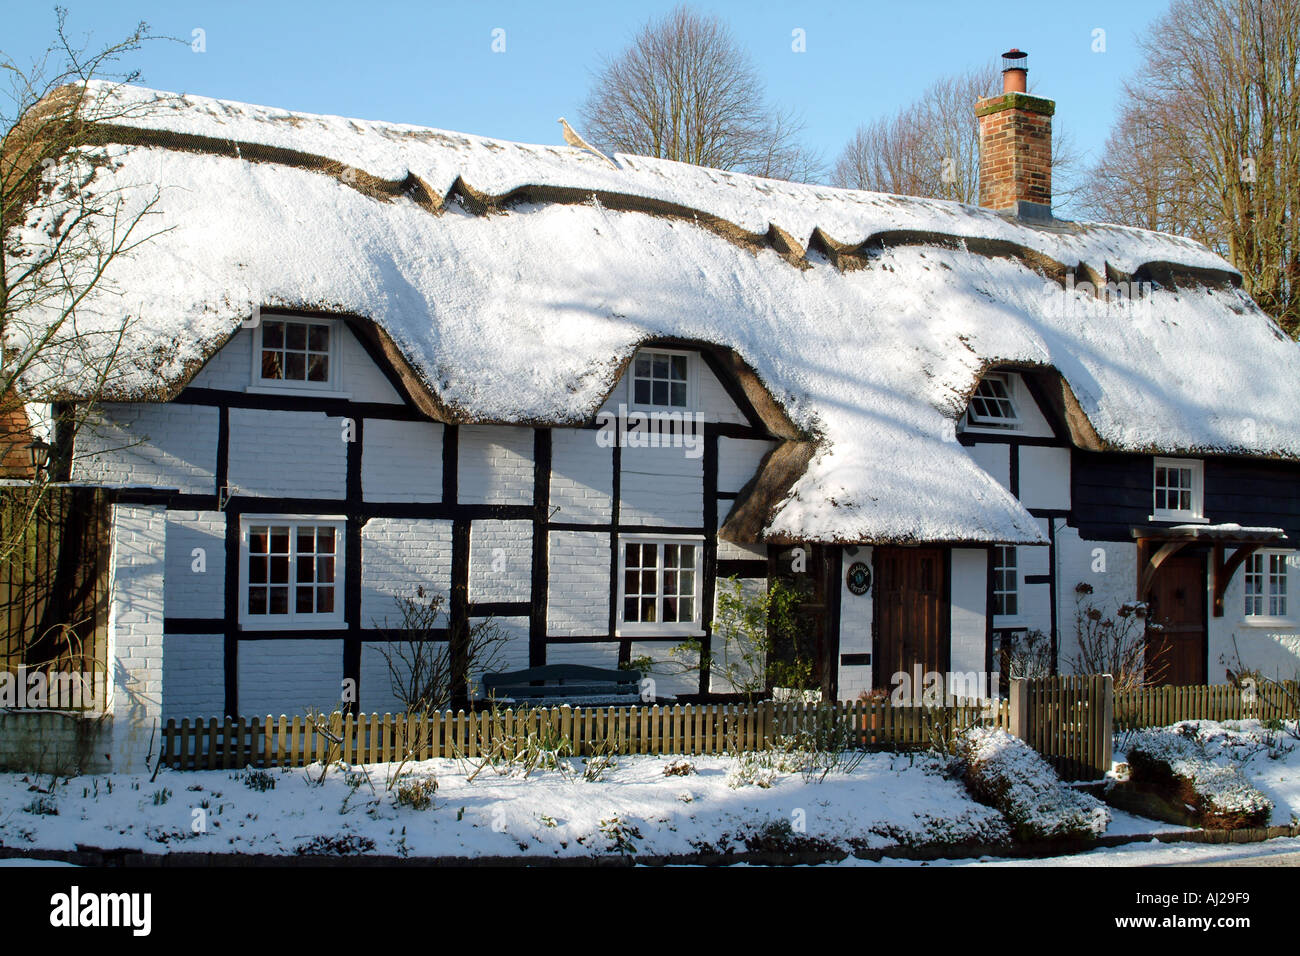 English Country Cottage In The Snow Micheldever Hants England Uk